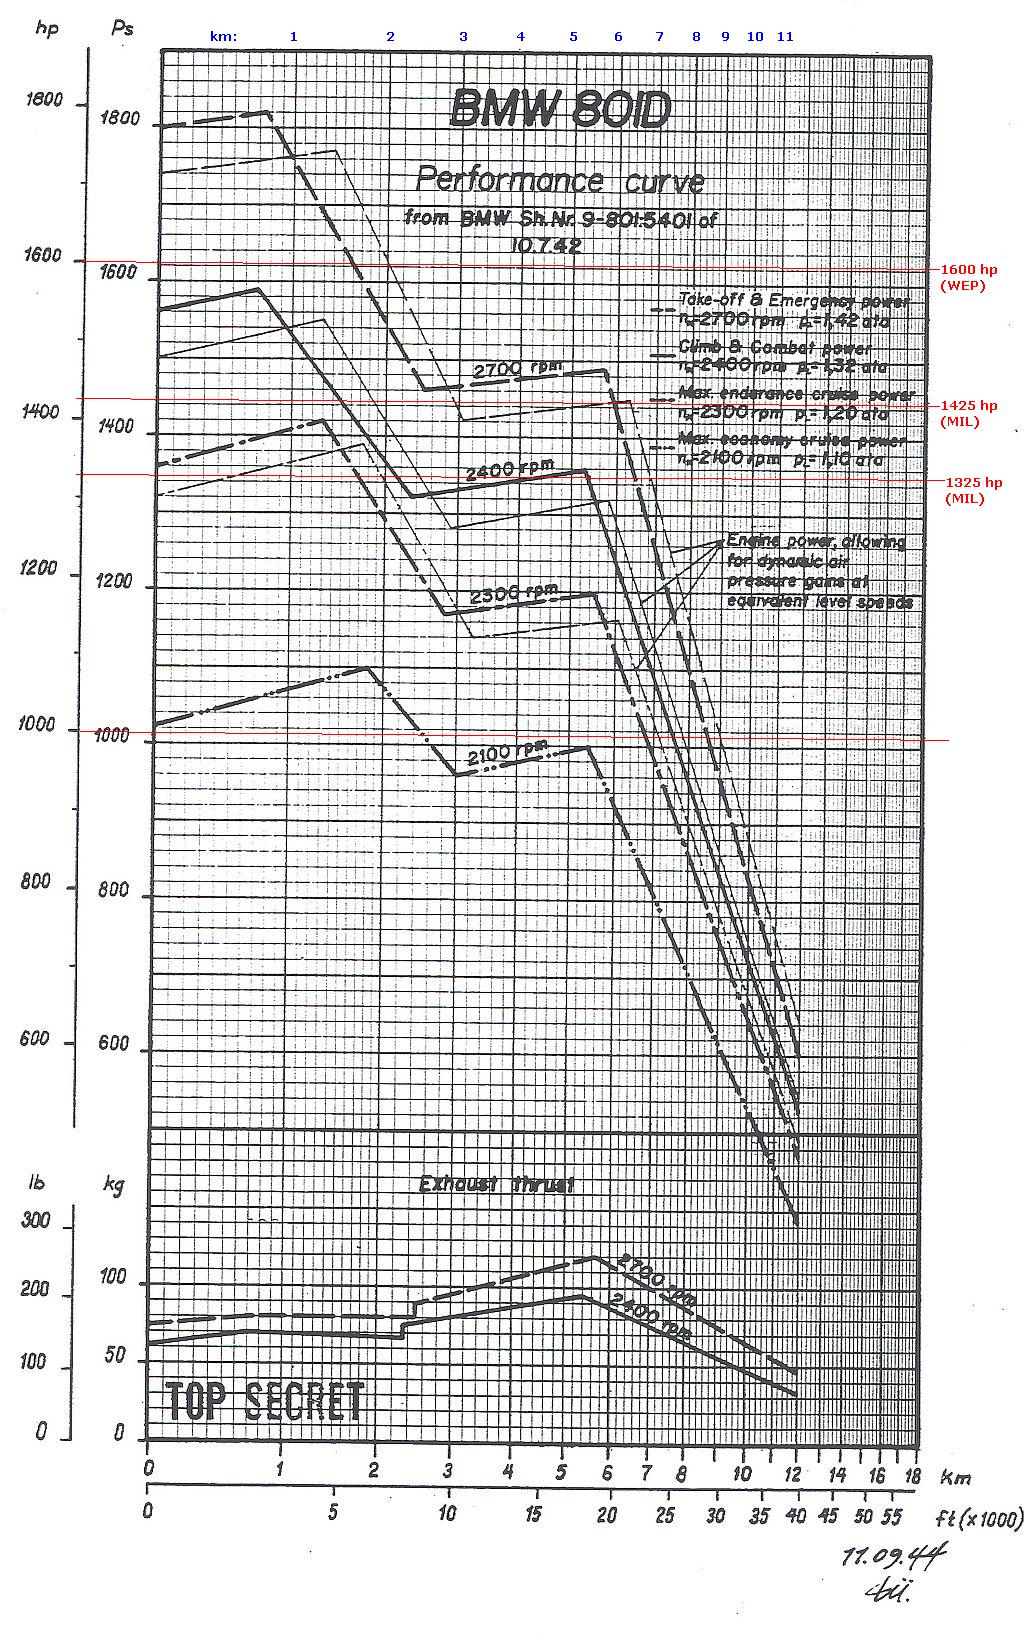 Power vs. altitude chart of the BMW 801D